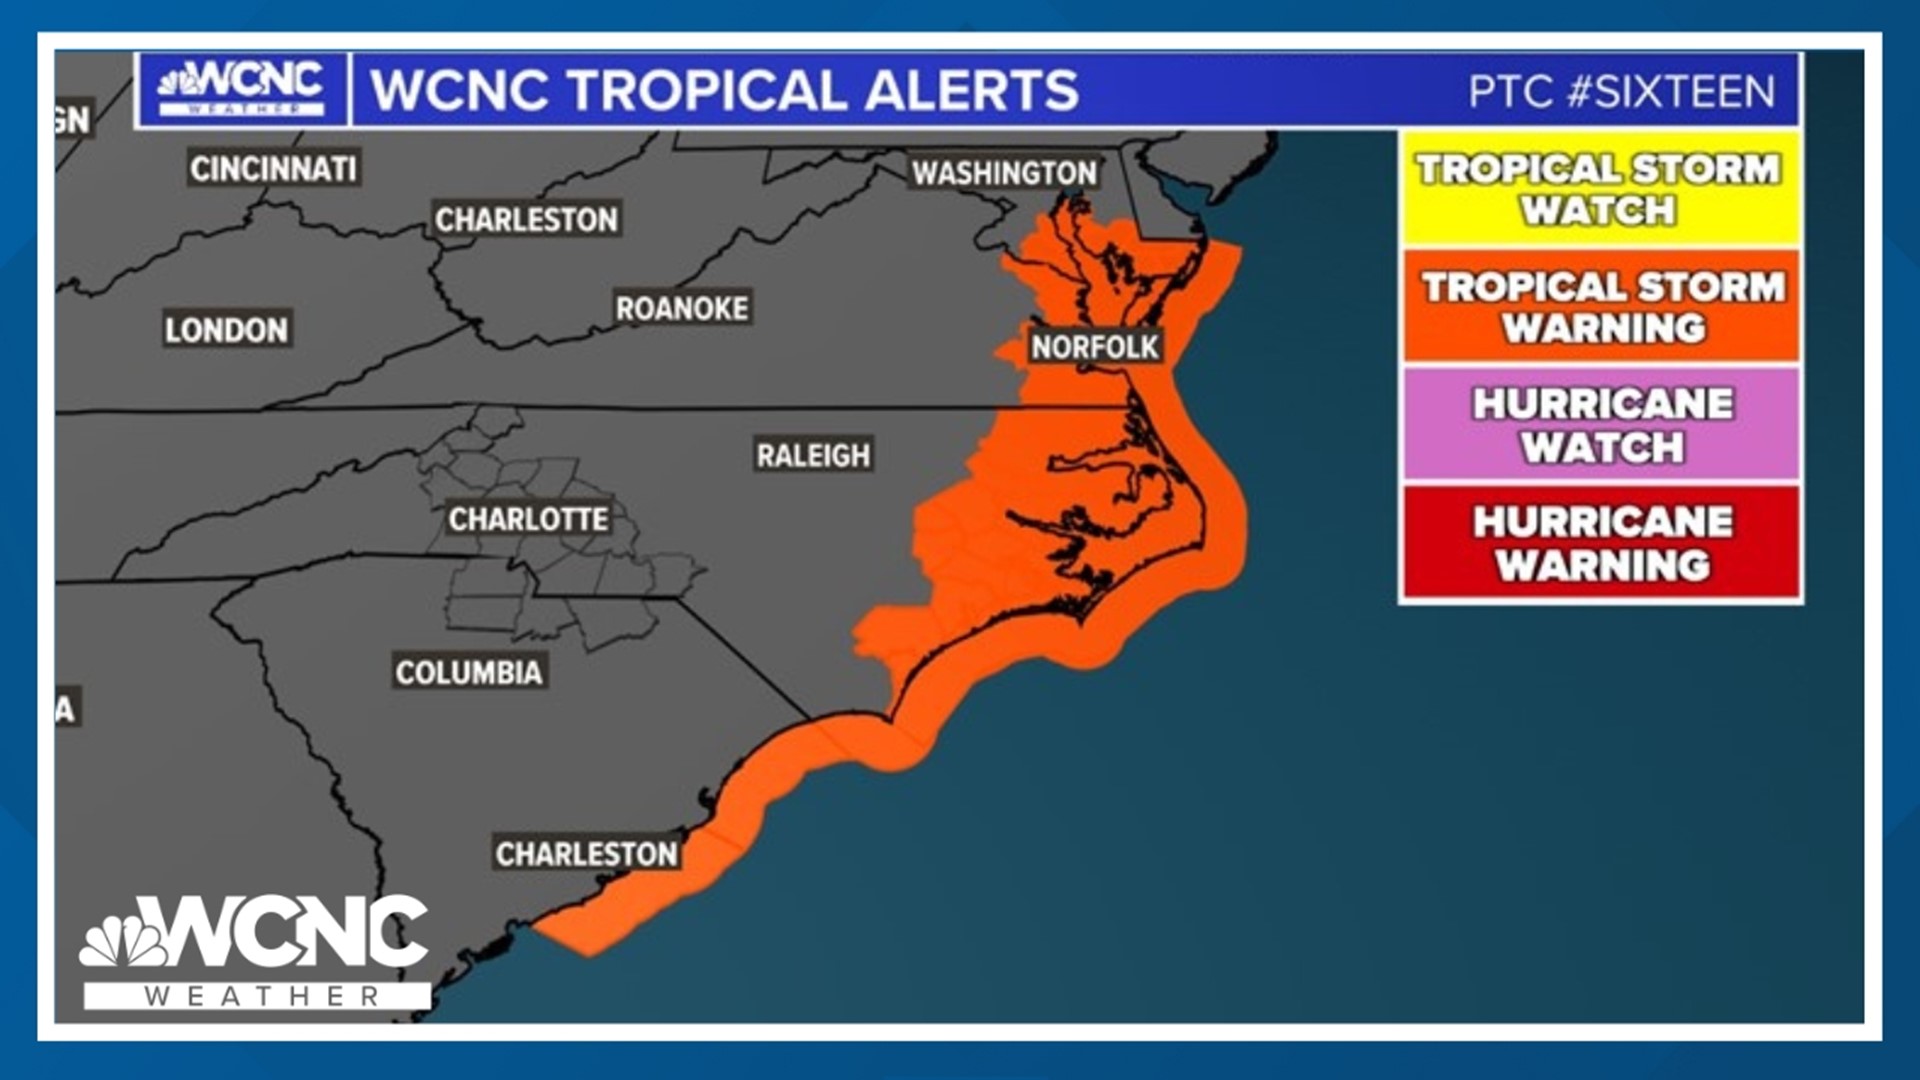 From Charleston to Virginia, storm warnings have been issued with the likely development of a tropical system offshore.